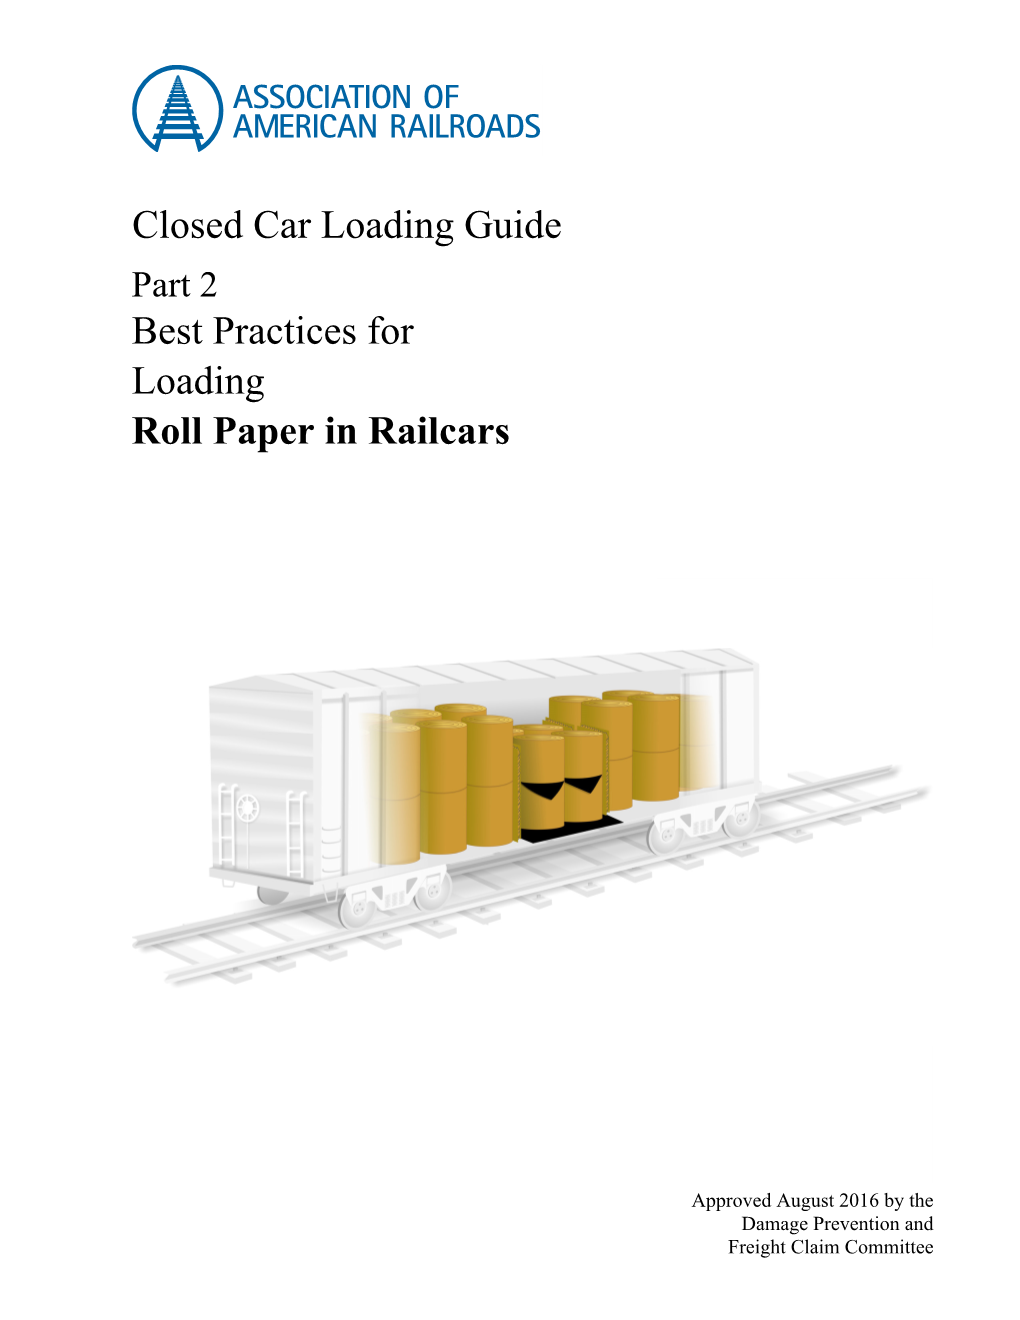 Part 2 Best Practices for Loading Roll Paper in Railcars